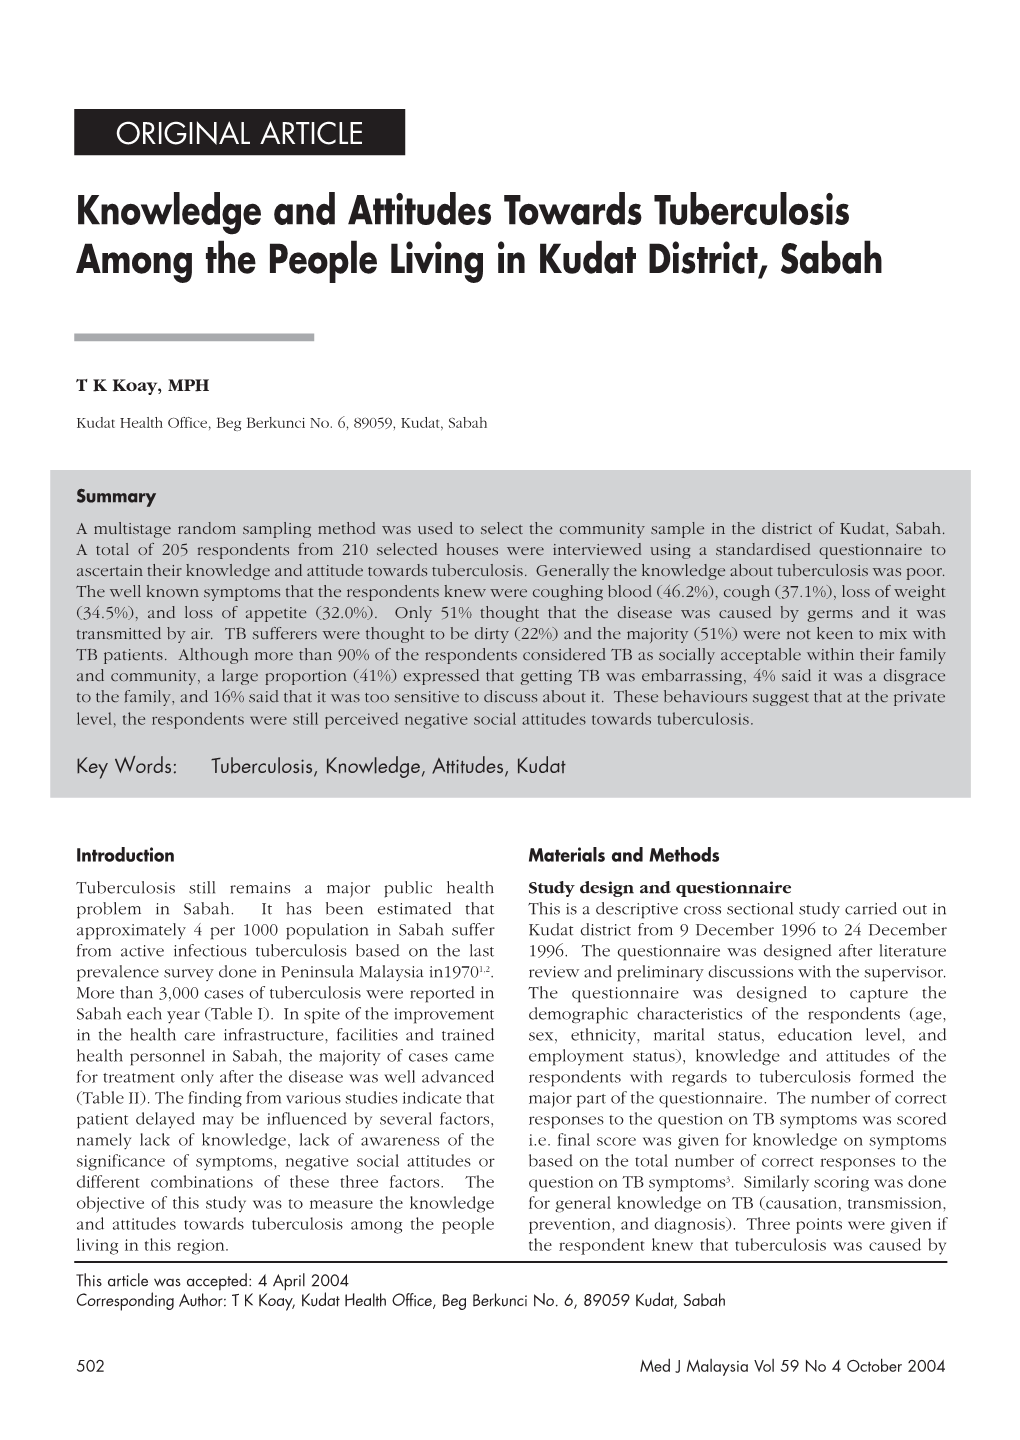 Knowledge and Attitudes Towards Tuberculosis Among the People Living in Kudat District, Sabah